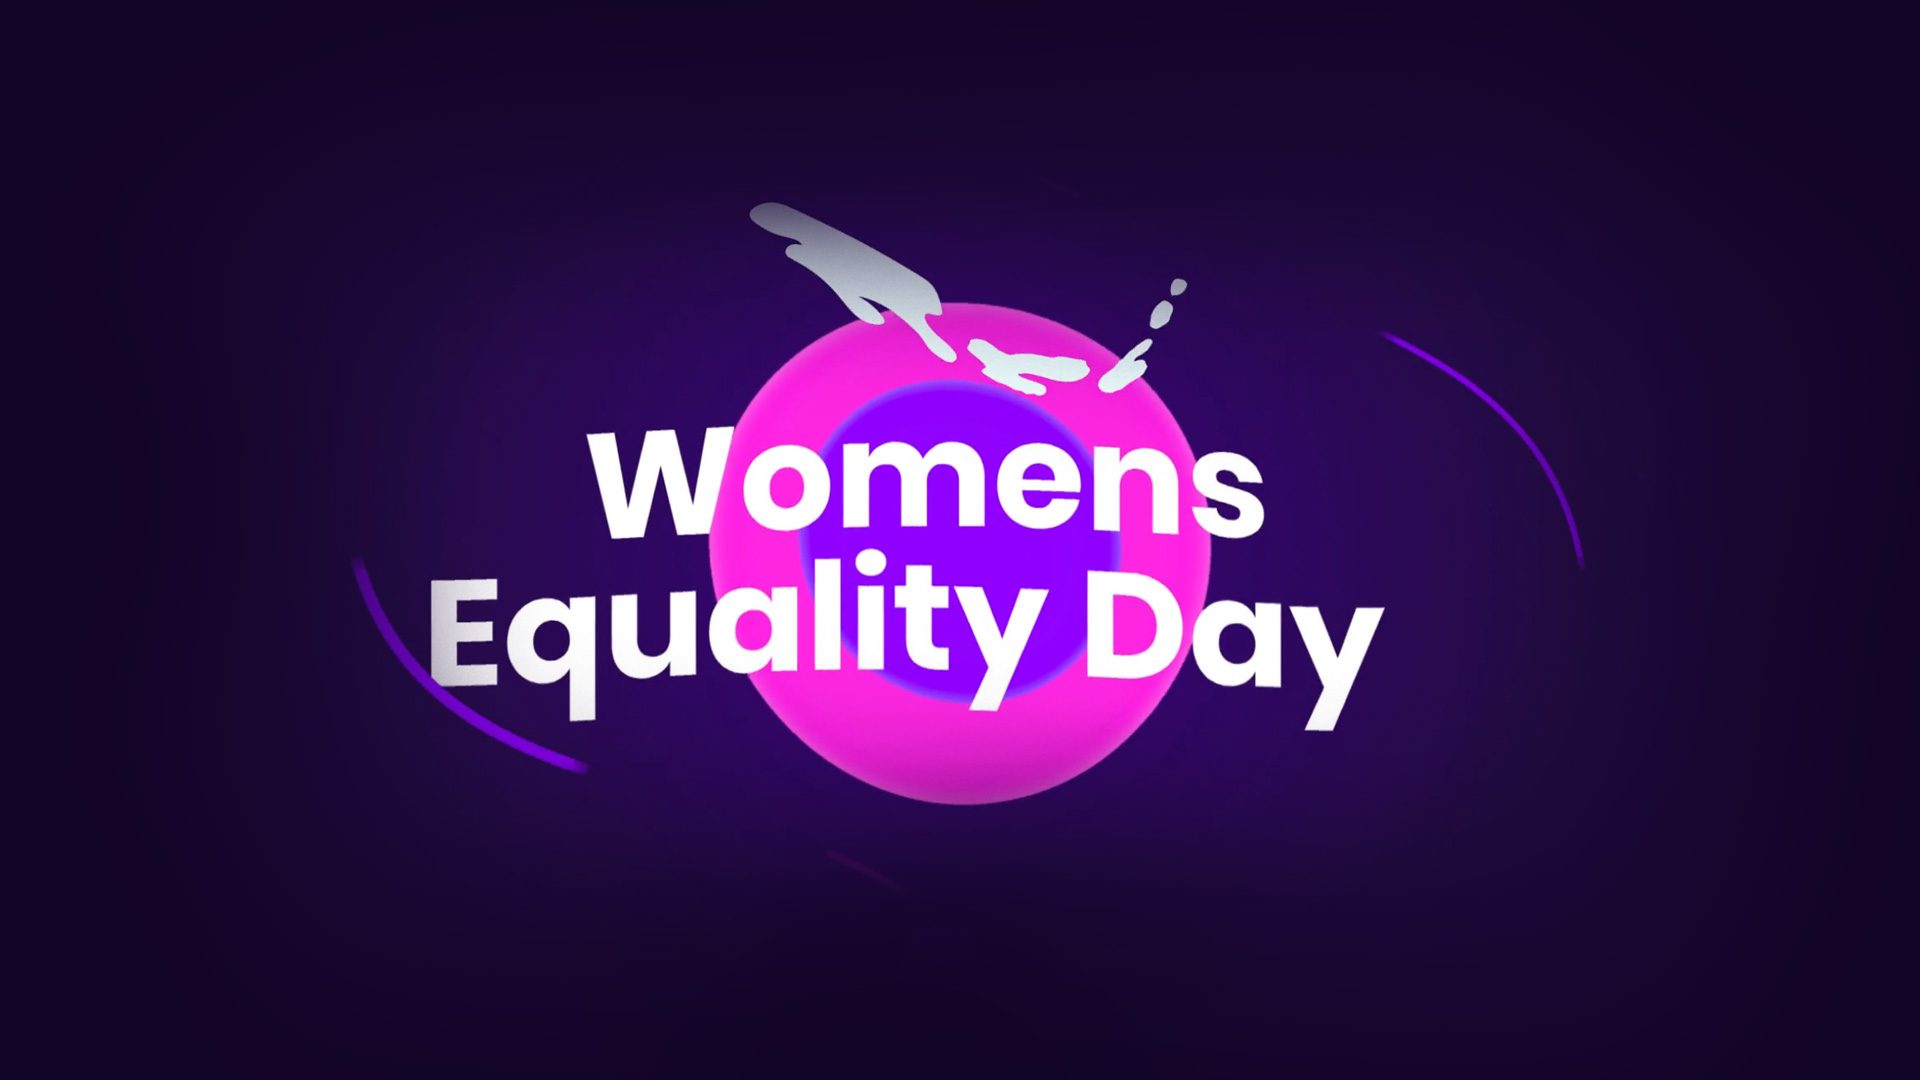 Women's Equality Day 2022